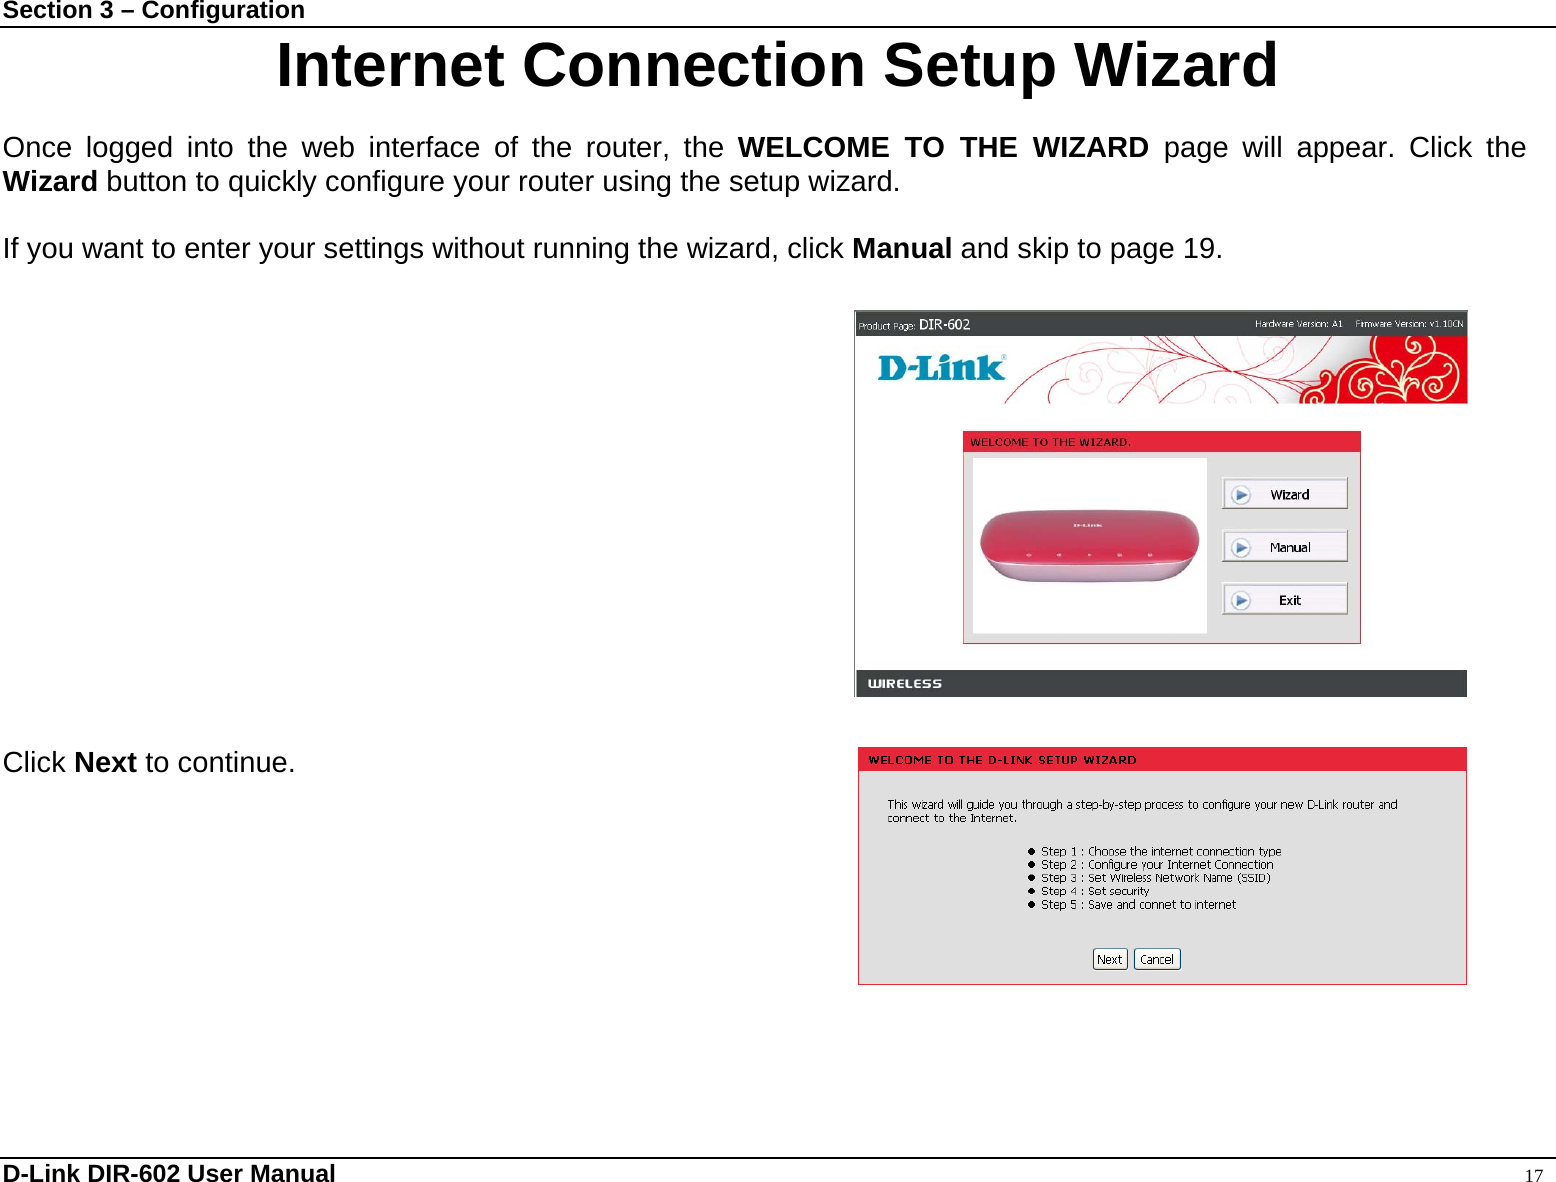 Section 3 – Configuration Internet Connection Setup Wizard  Once logged into the web interface of the router, the WELCOME TO THE WIZARD page will appear. Click the Wizard button to quickly configure your router using the setup wizard.  If you want to enter your settings without running the wizard, click Manual and skip to page 19.                Click Next to continue.    D-Link DIR-602 User Manual                                                                                               17 